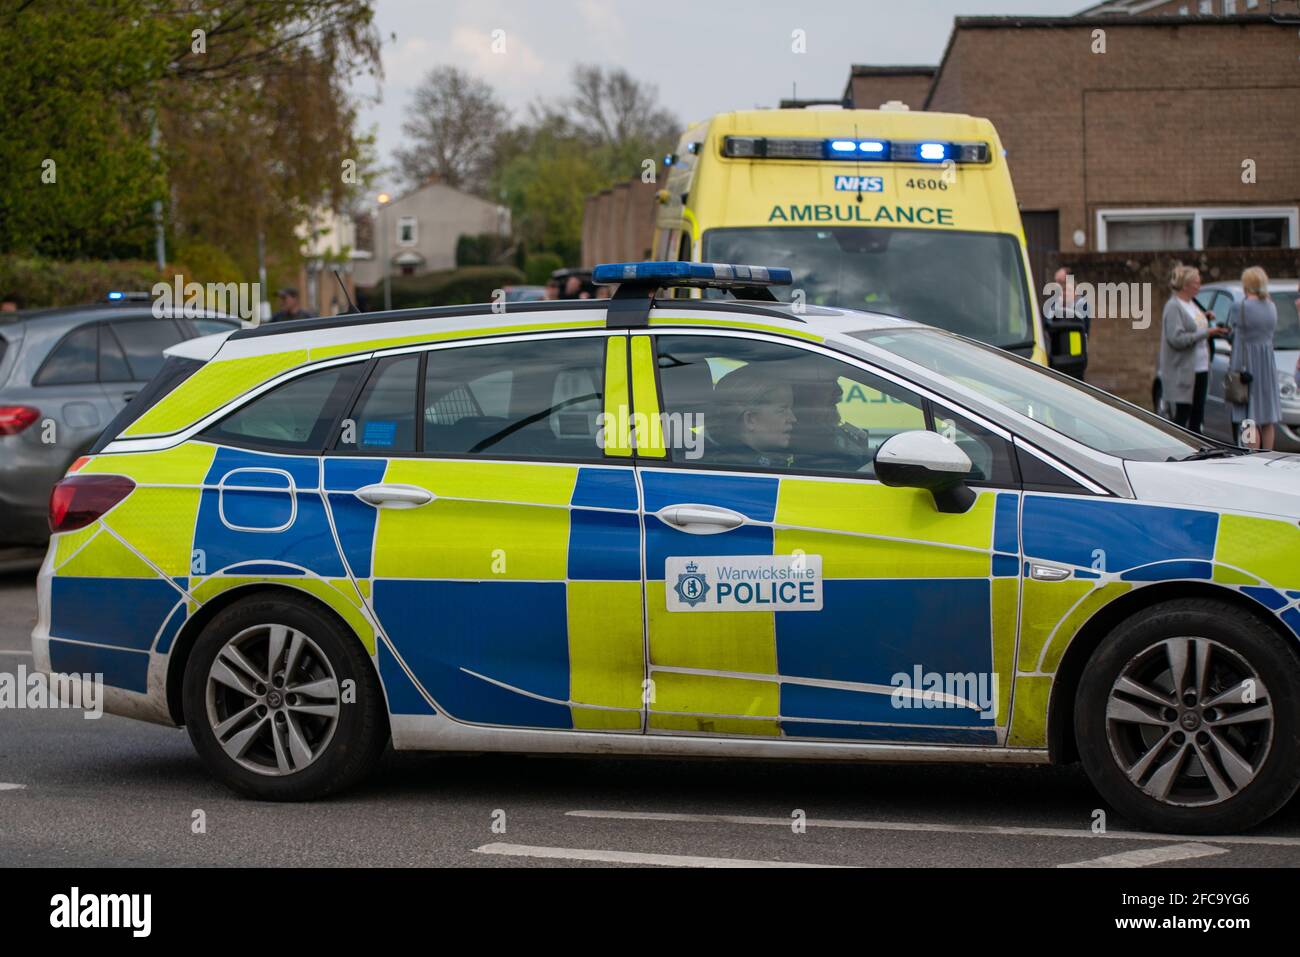 Warwickshire Police Vauxhall Astra with West Midlands Ambulance Service Fiat Ducato ambulance in the background. Incident in Leamington Spa. Stock Photo